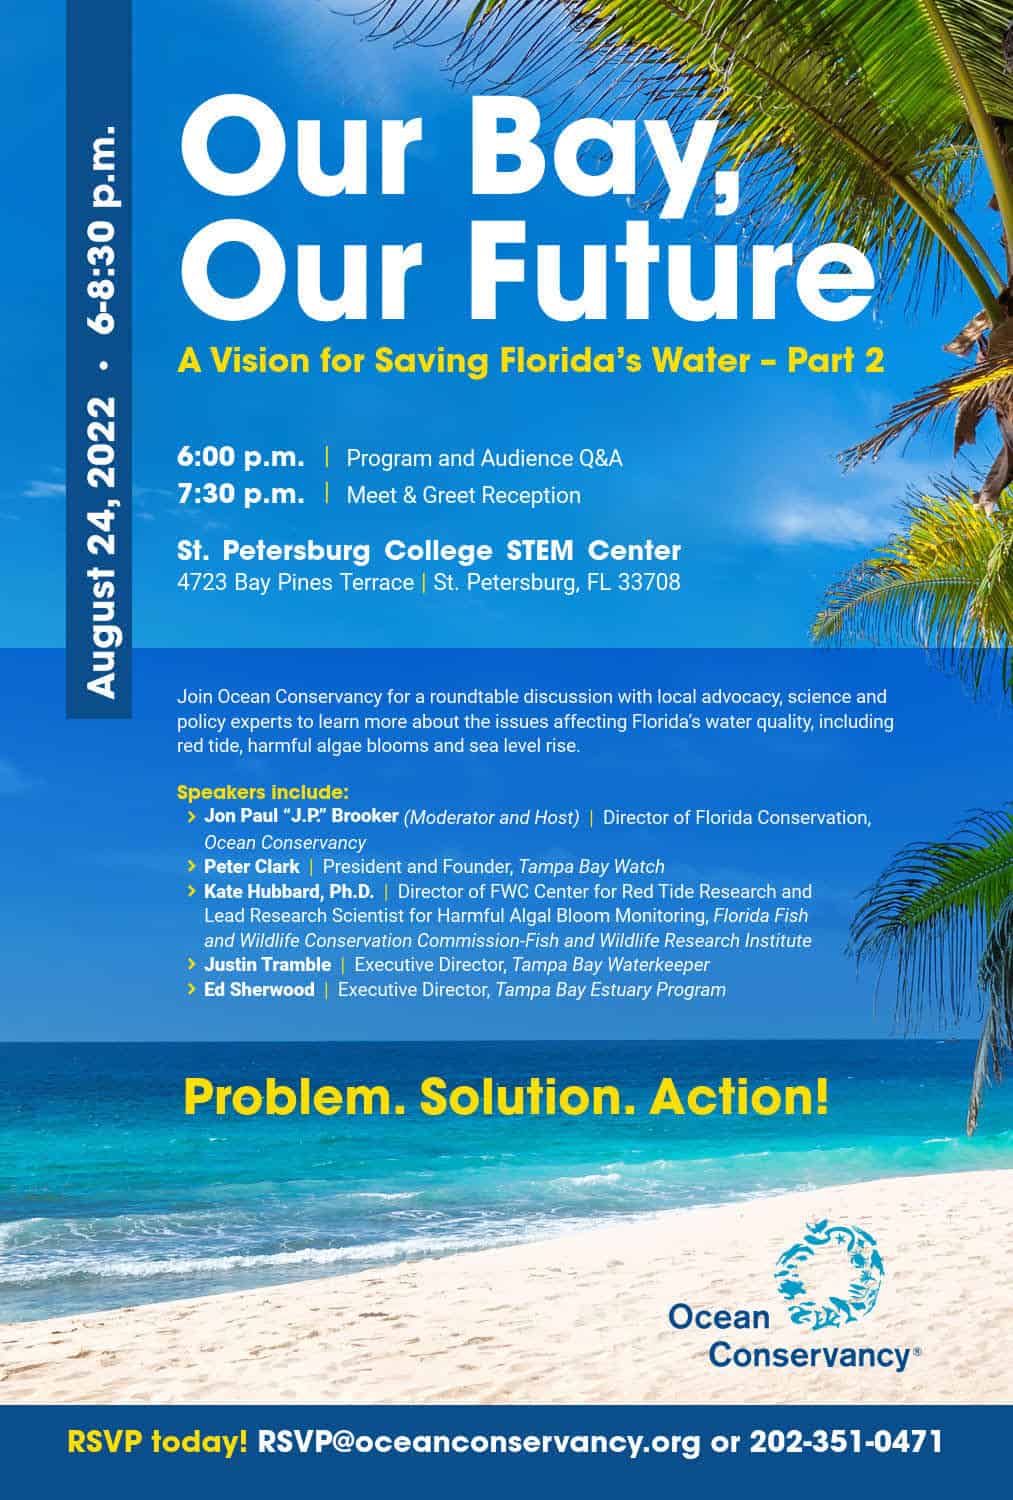 Our Bay, Our Future event details with image of palm trees on the beach